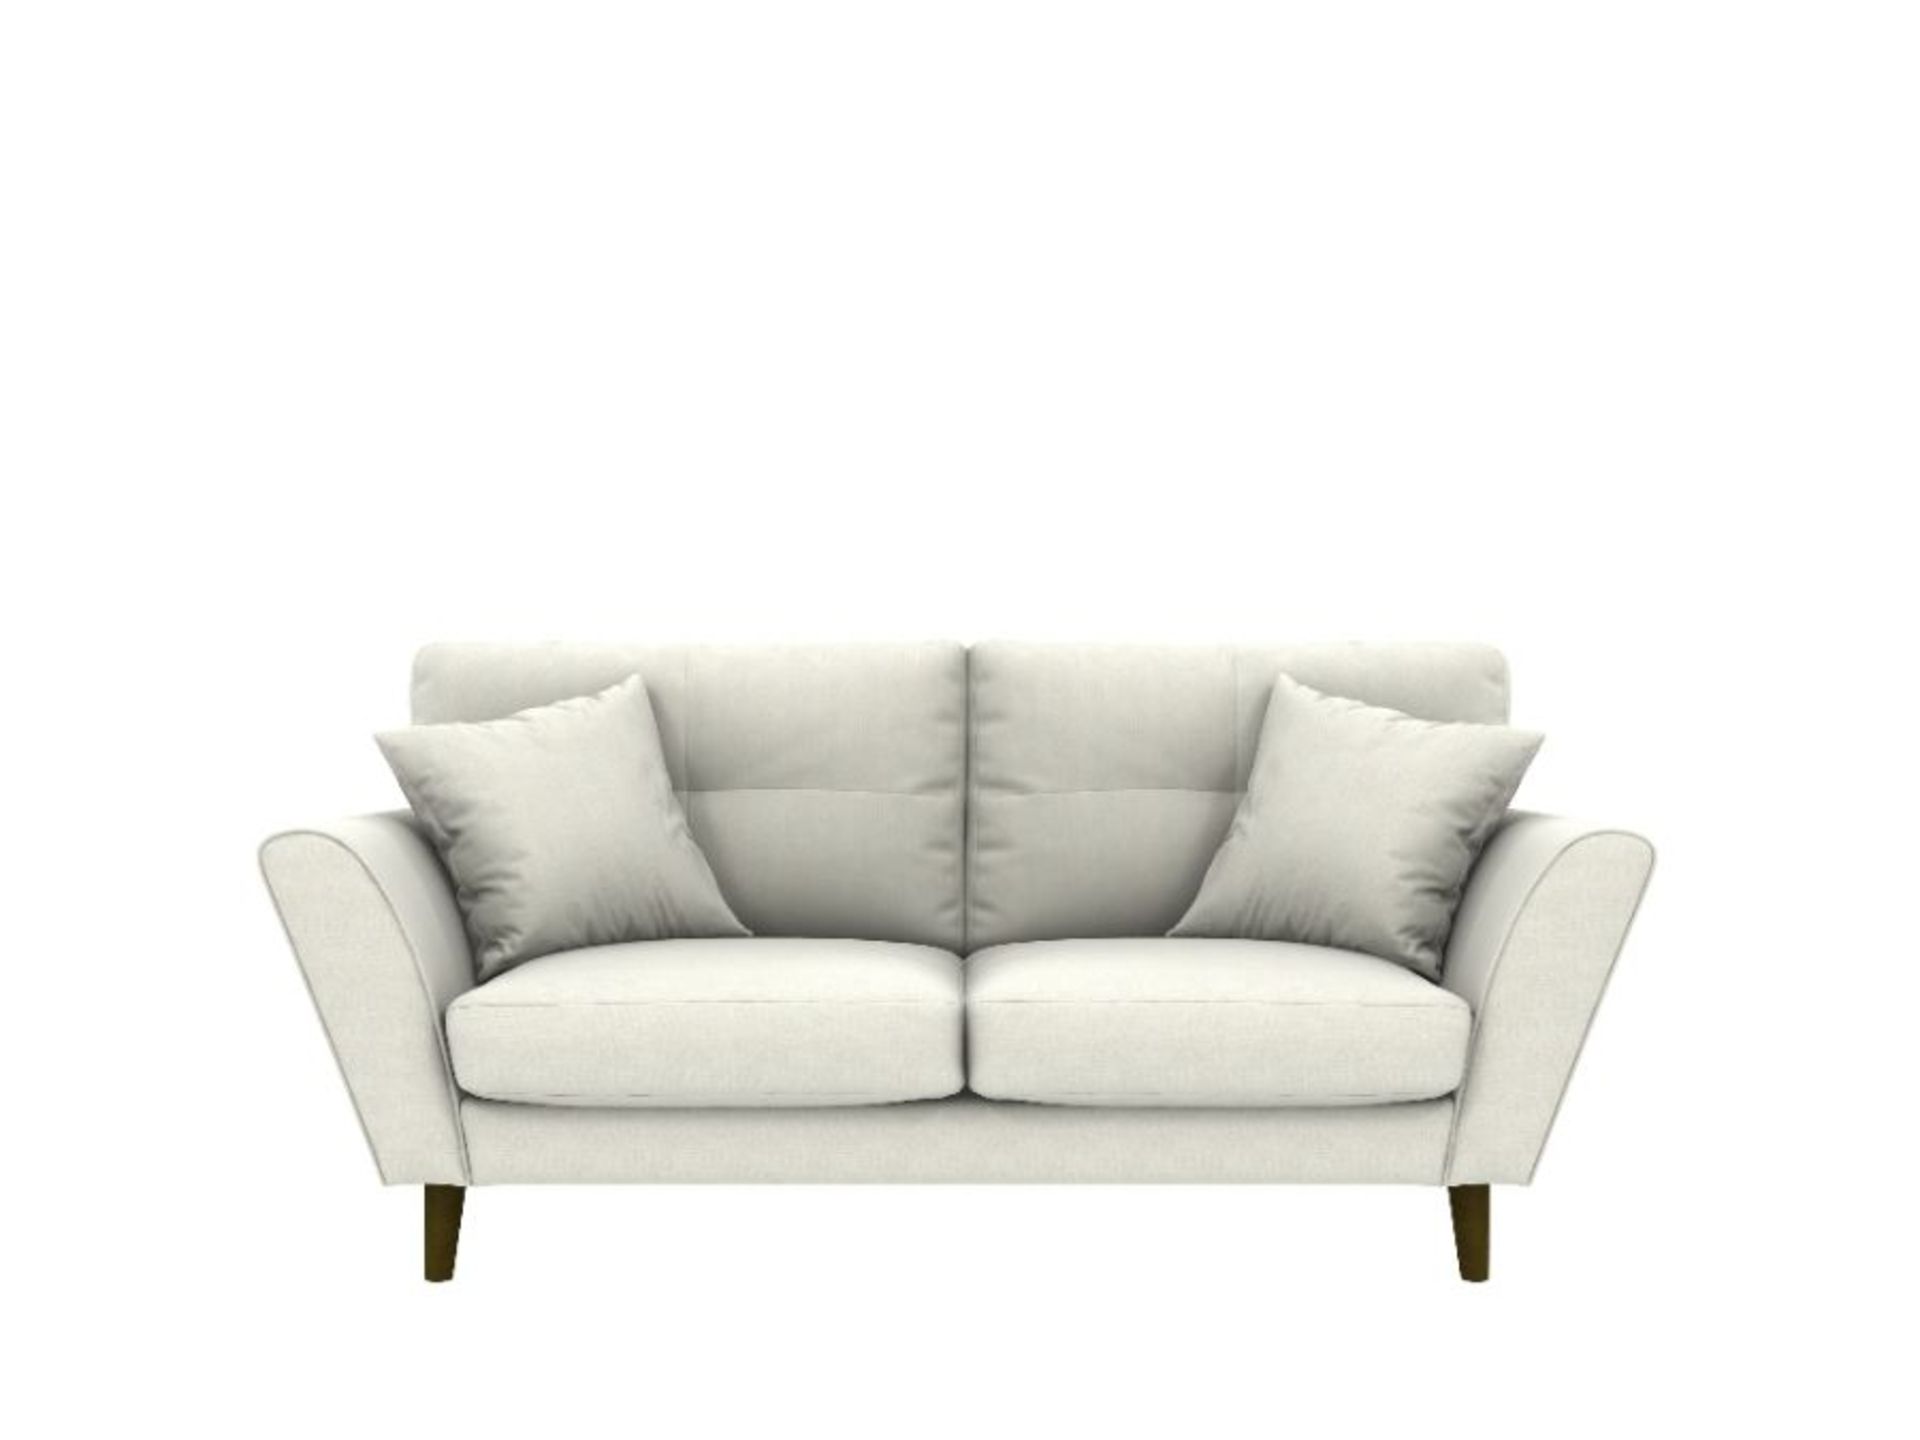 EX SHOWROOM HALLIE MARSEILLE WHITE 3 SEATER AND 2 - Image 2 of 3